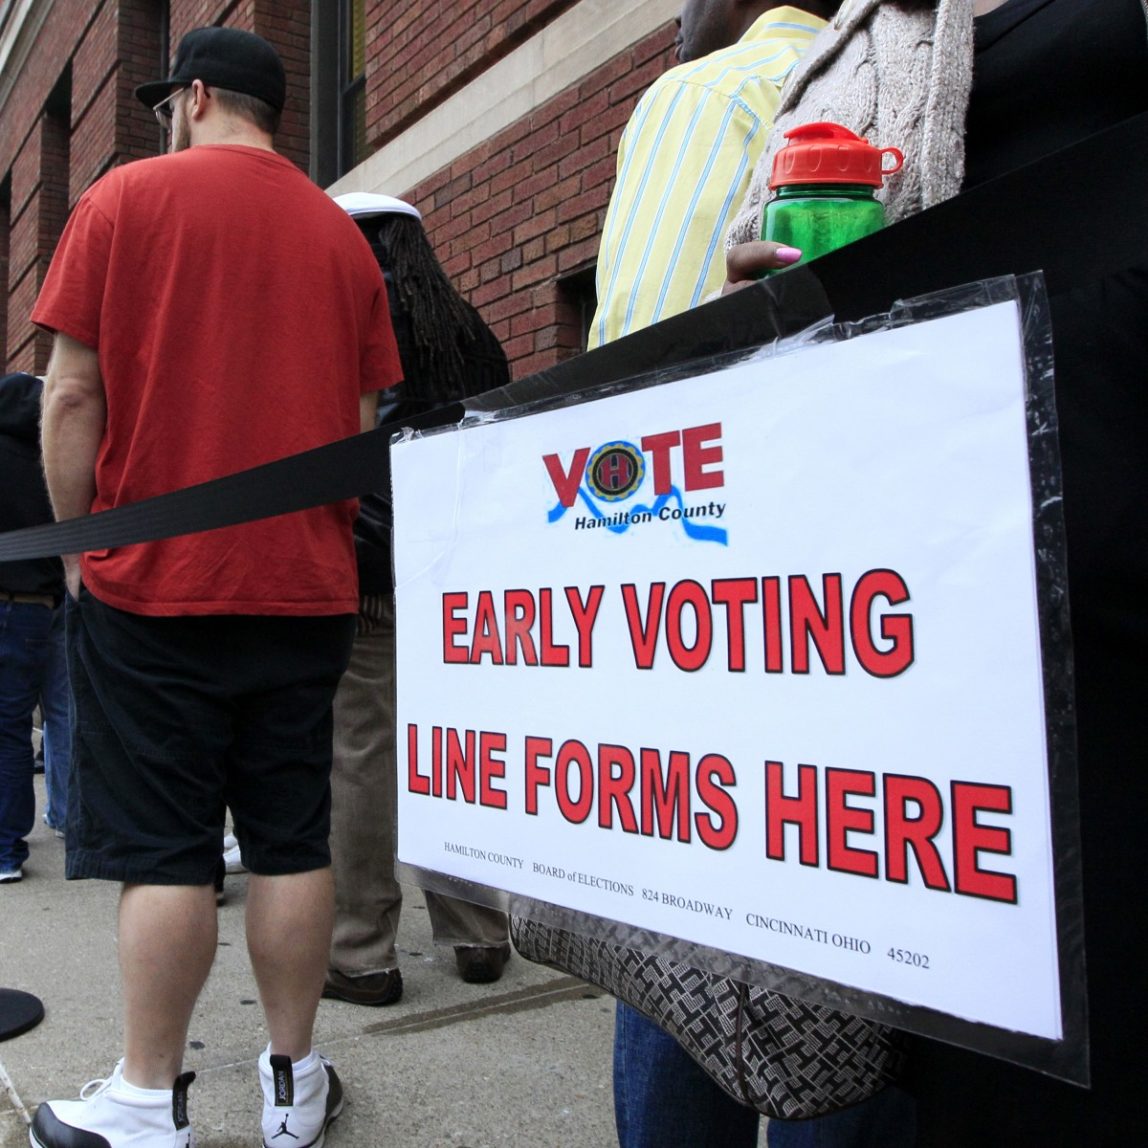 In this Oct. 2, 2012 file photo, voters stand in line outside the Hamilton County Board of Elections just before it opened for early voting, in Cincinnati. (AP Photo/Al Behrman, File)